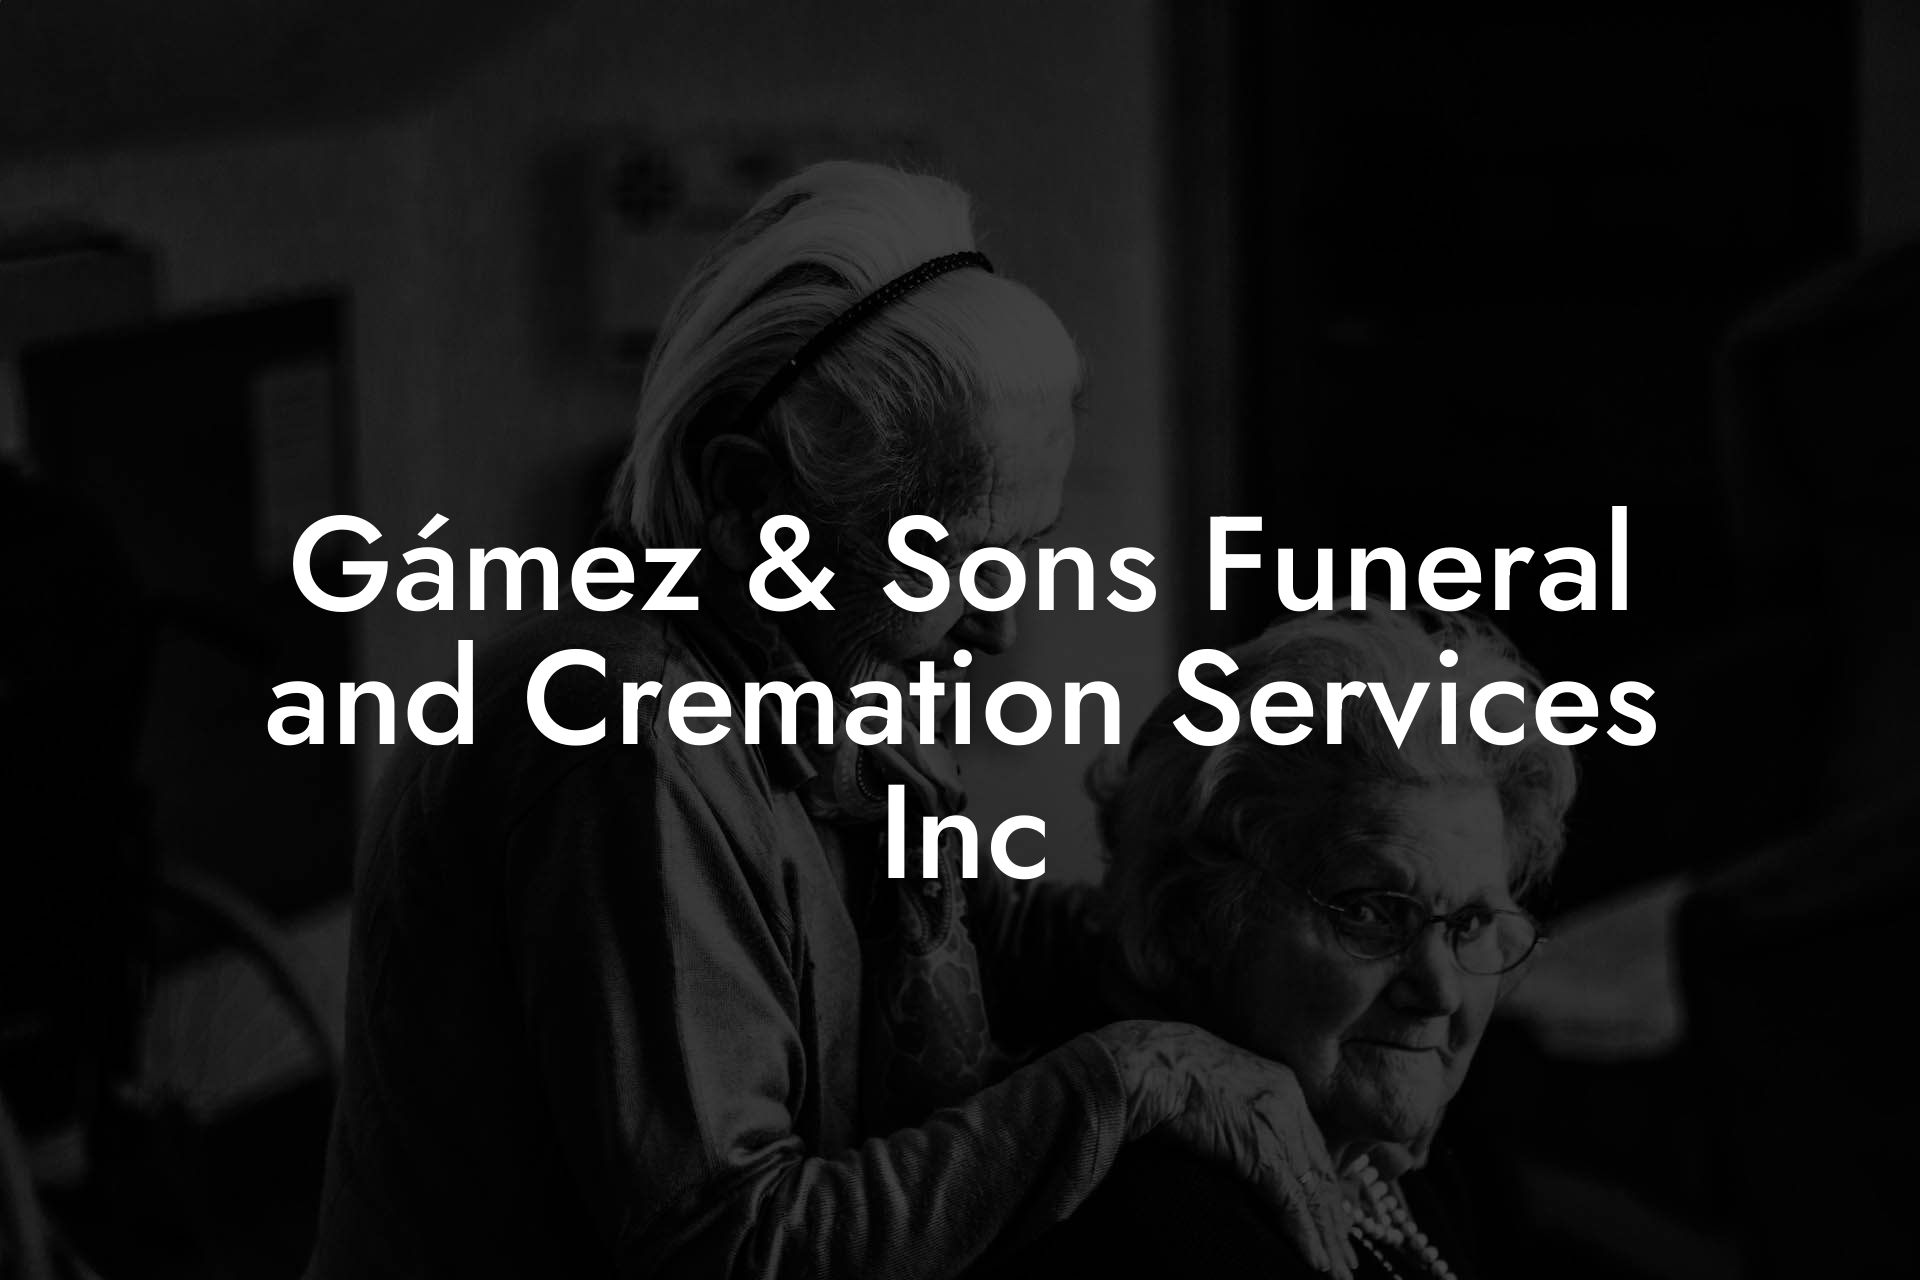 Gámez & Sons Funeral and Cremation Services Inc